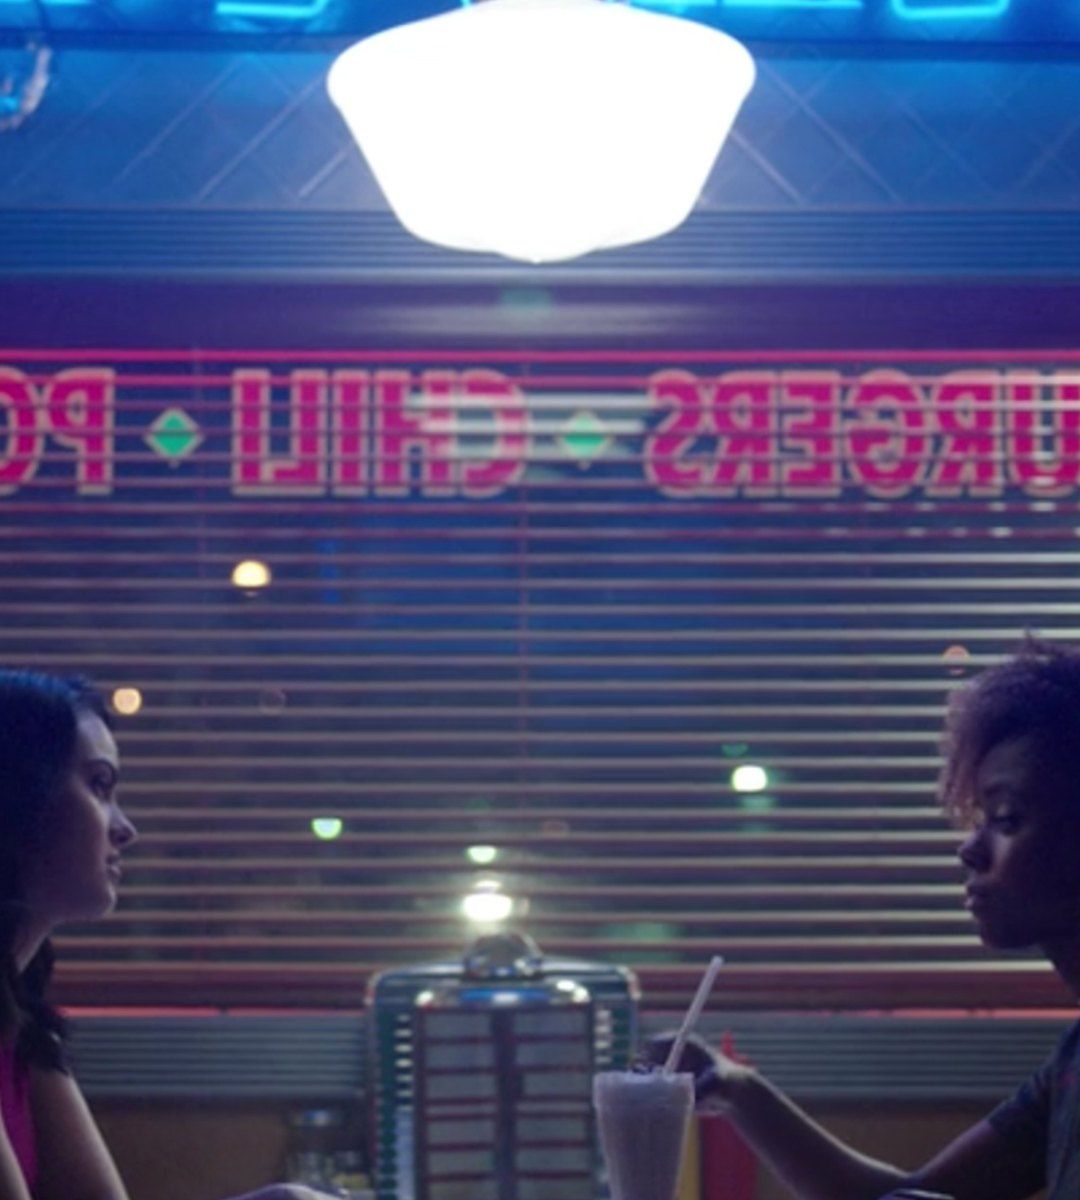 Two characters from Riverdale sit at a diner table under a neon sign - Riverdale